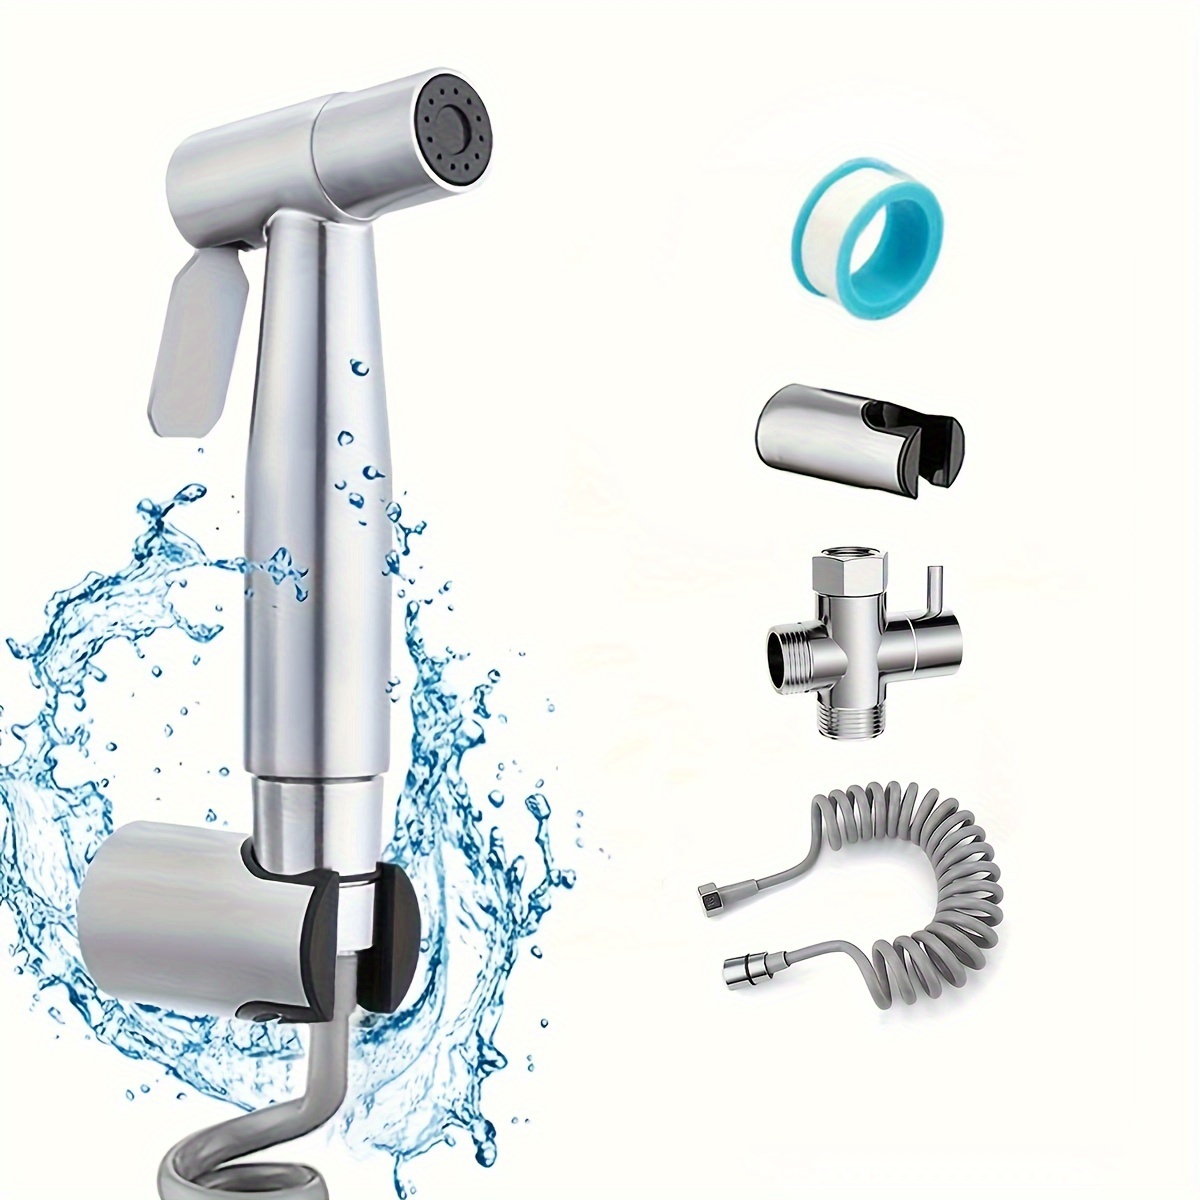 

1 Set Toilet Seat Bidet Sprayer With Manual Bathtub Faucet, Bathroom Manual Bidet Sprayer, Shower Head For Self-cleaning